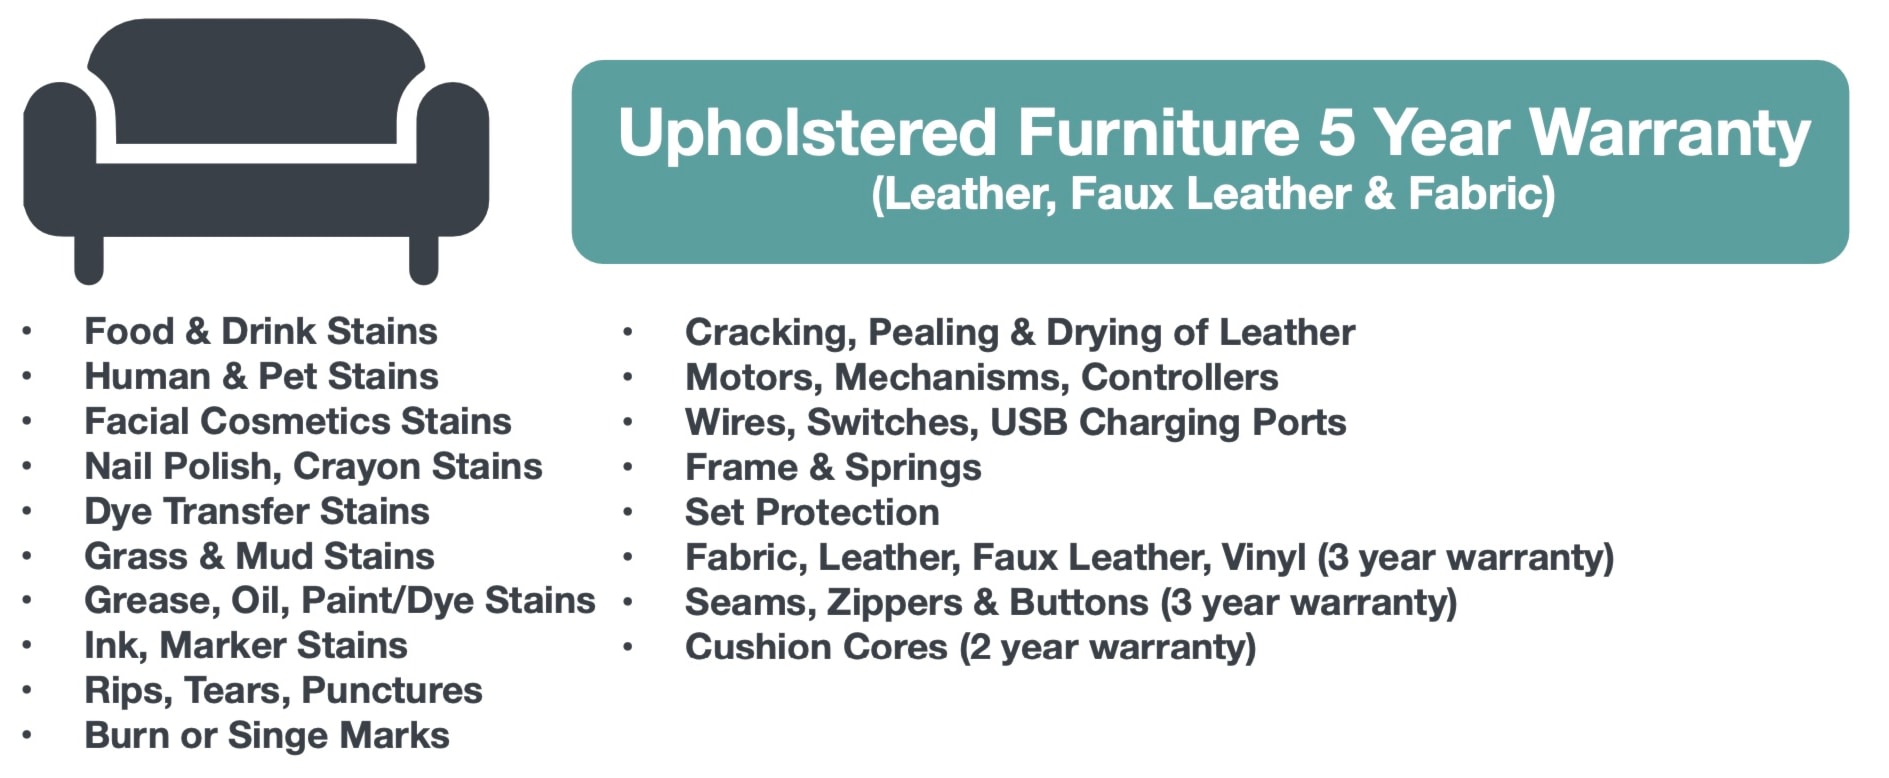 Upholstered Furniture and Wood & Solid Surface Furniture - Premium Plan with Plus+ Protection